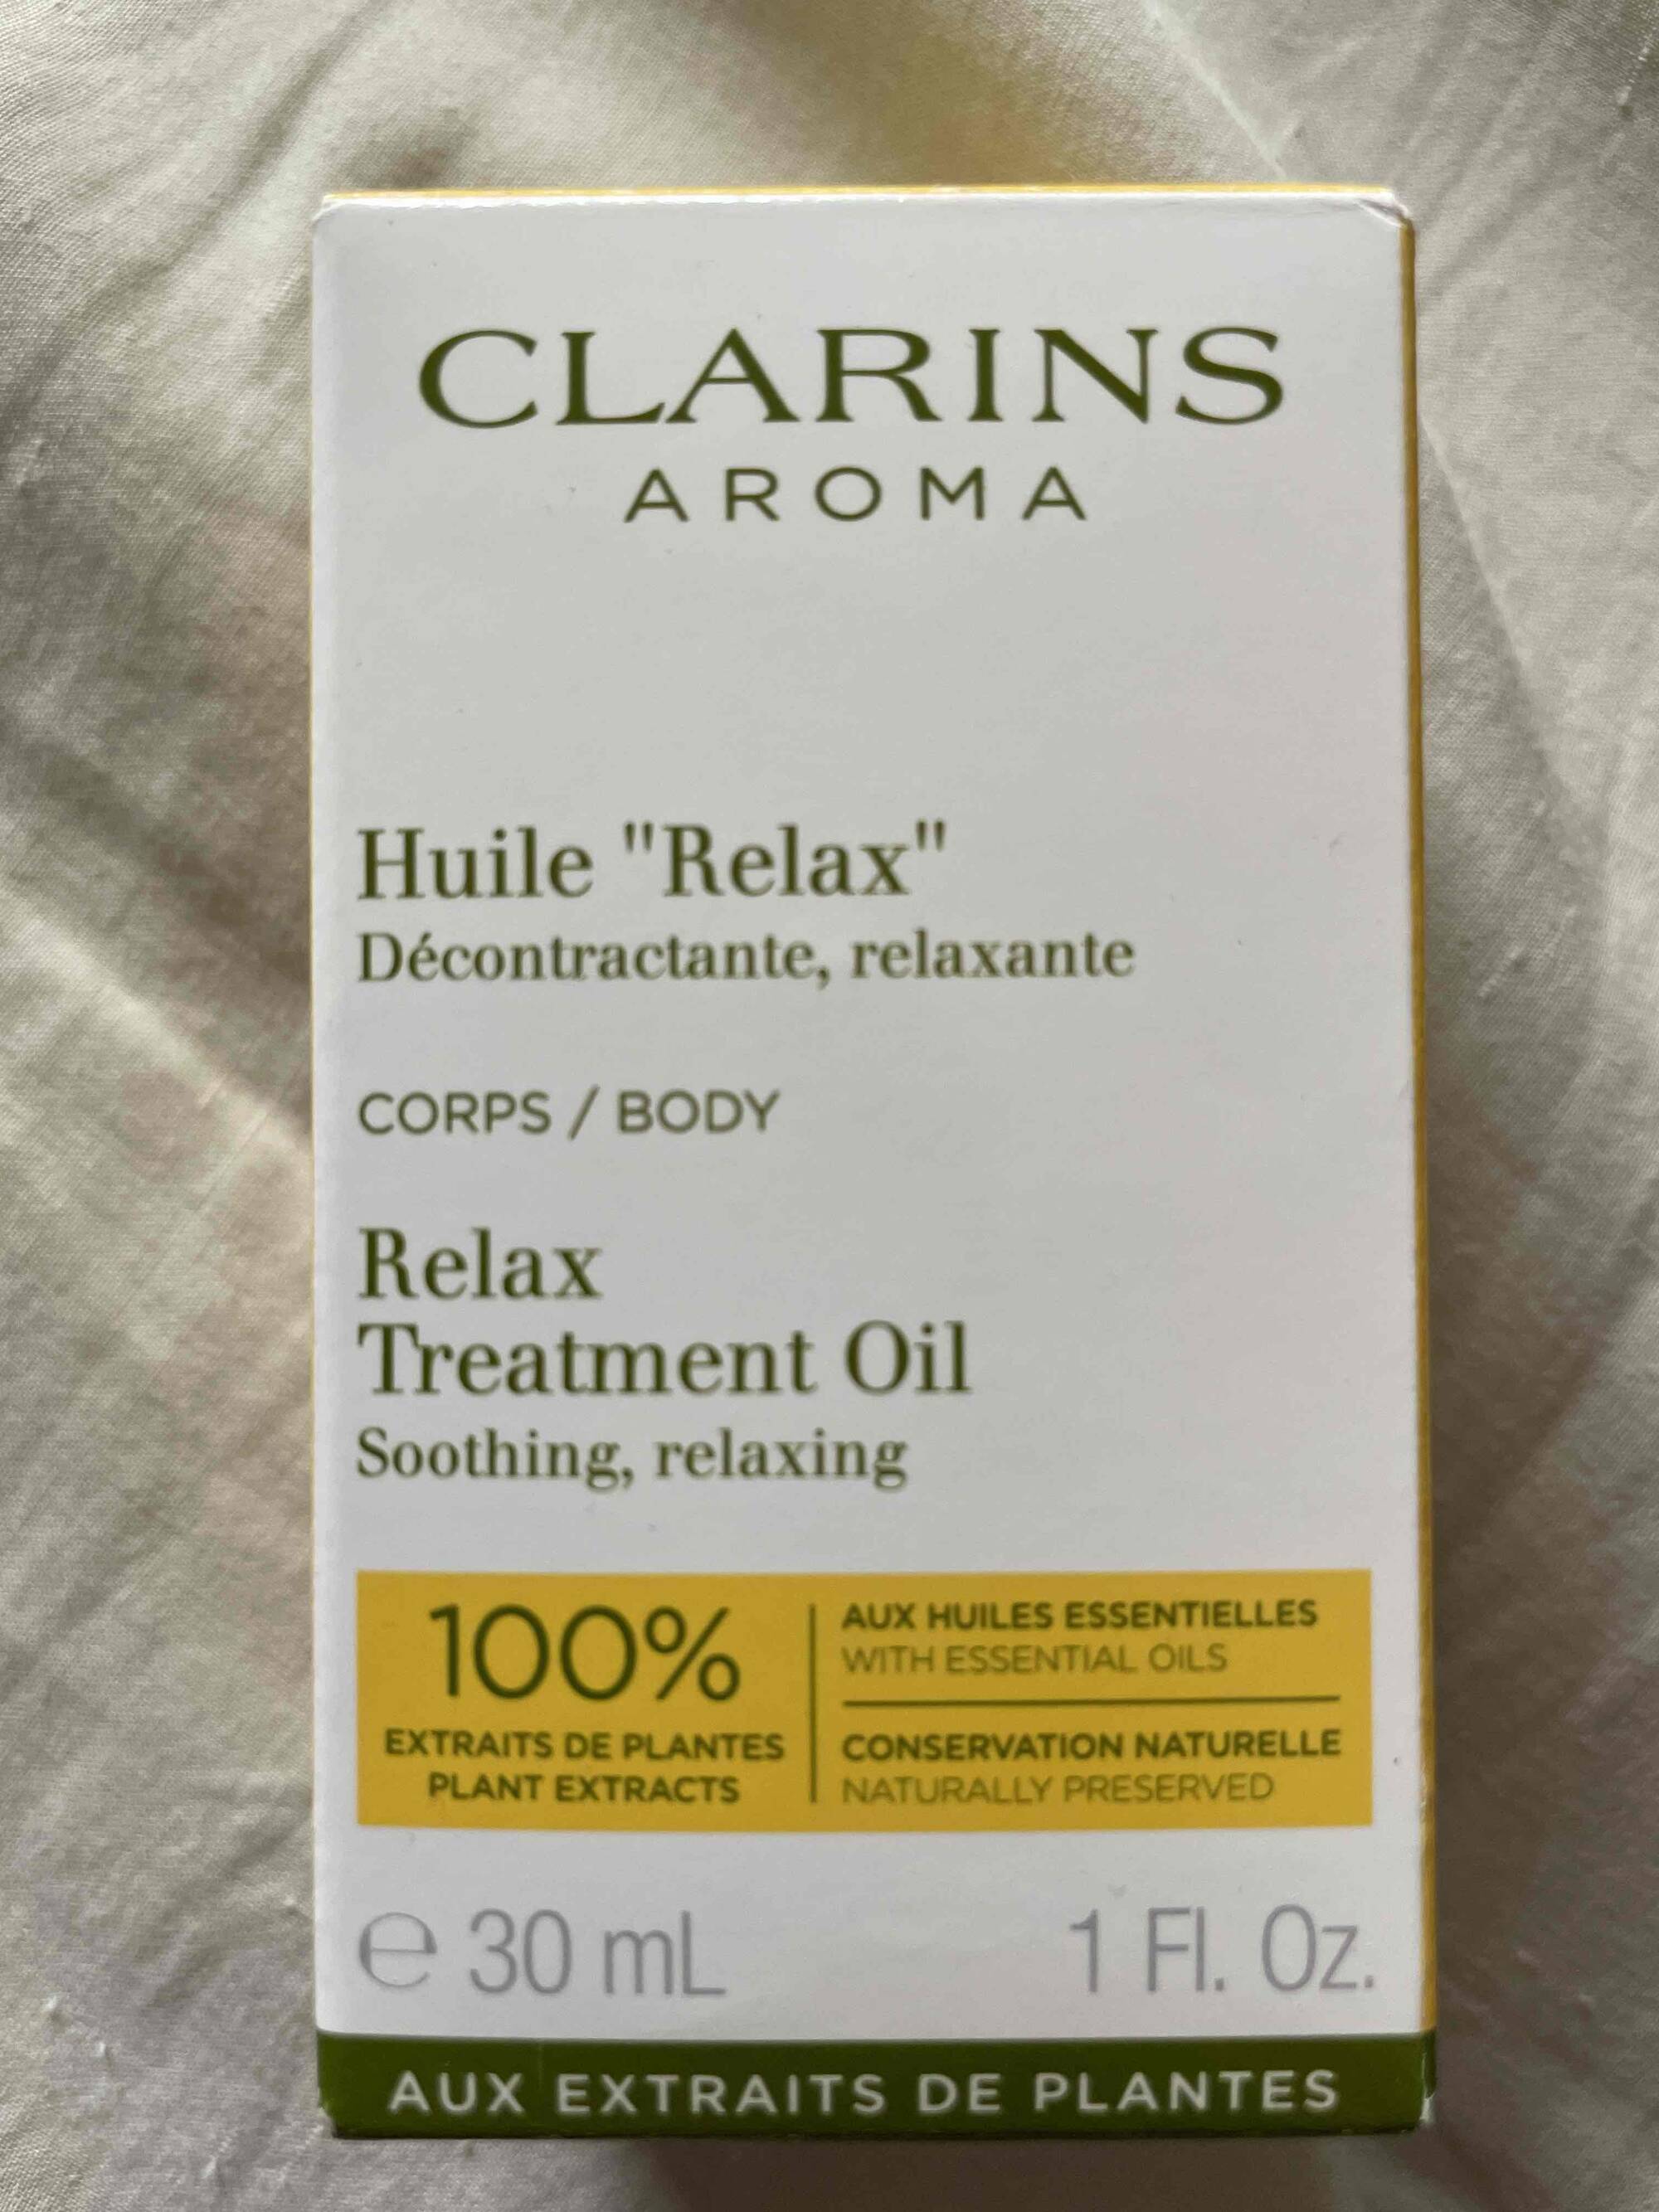 CLARINS - Huile Relax